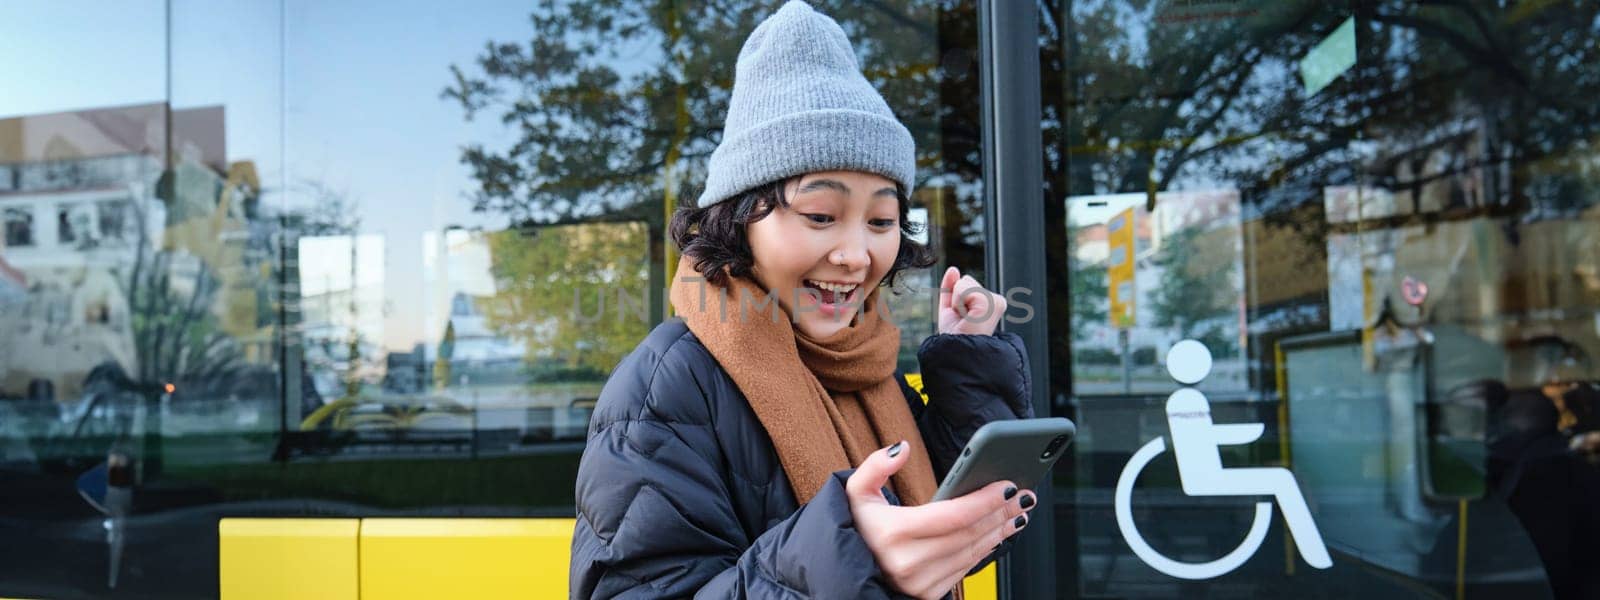 Modern people and lifestyle. Happy asian girl screams from joy, celebrates, stands near bus public transport and looks amazed.